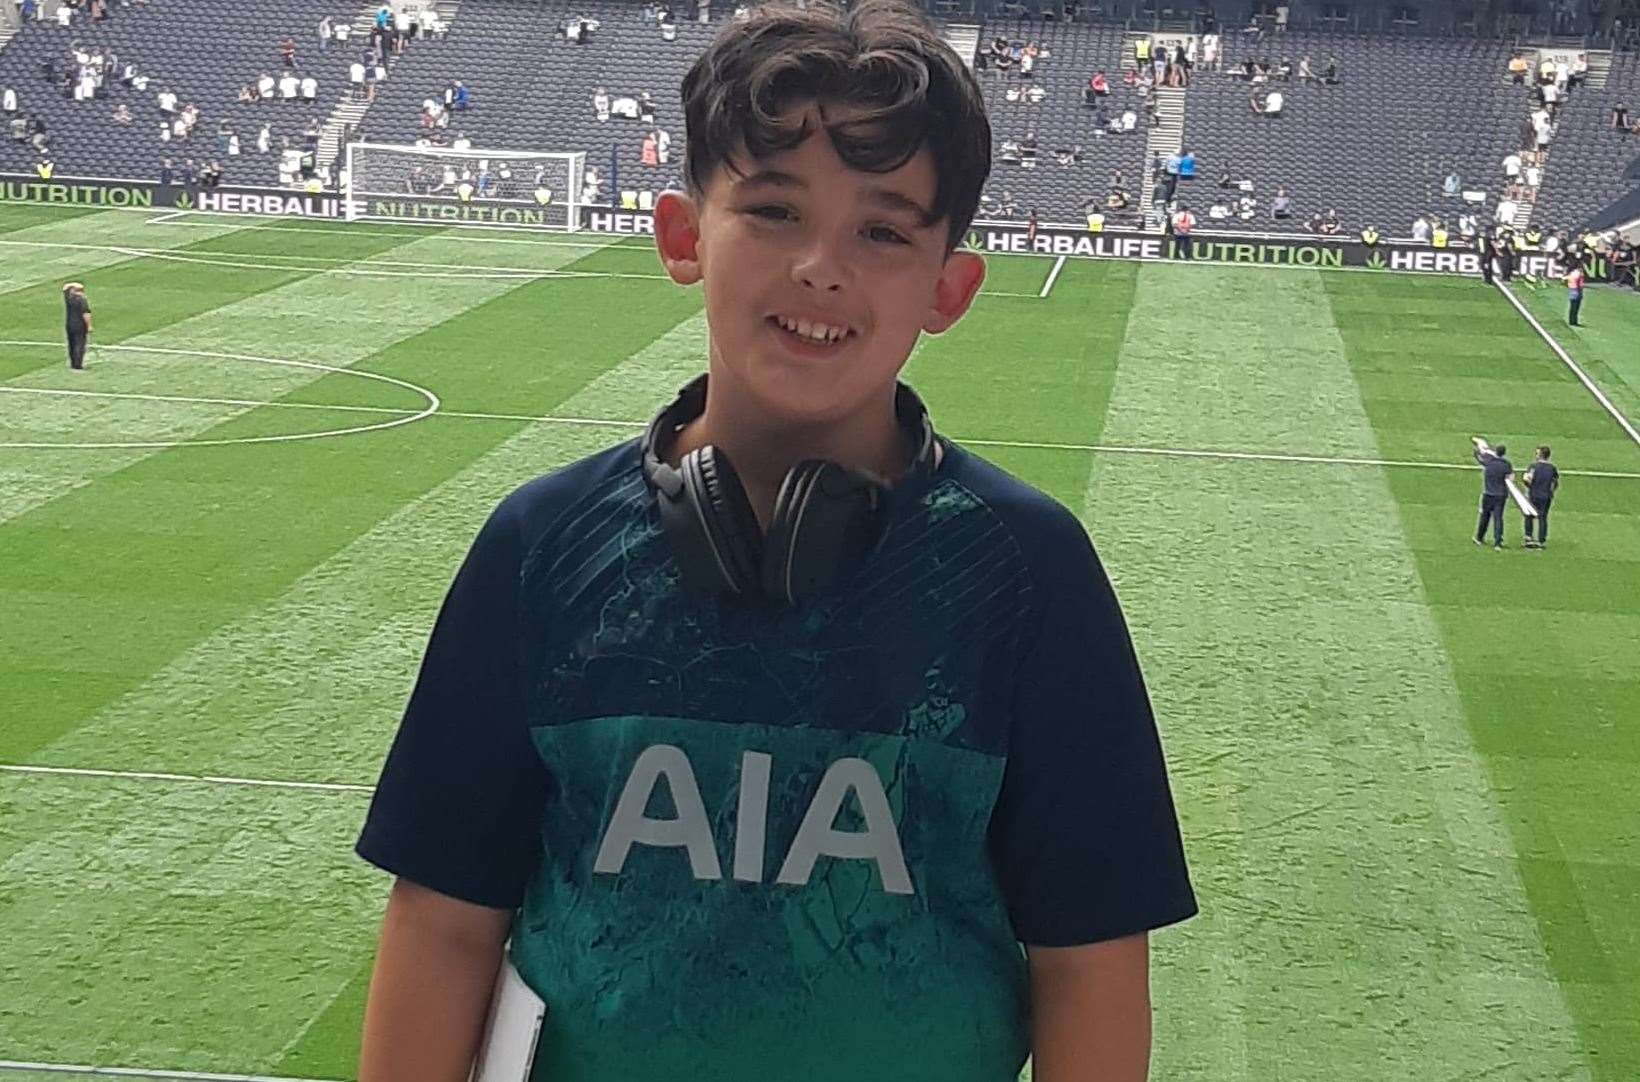 The parents of Spurs fan Liam Evans would like people to wear sports shirts to his funeral